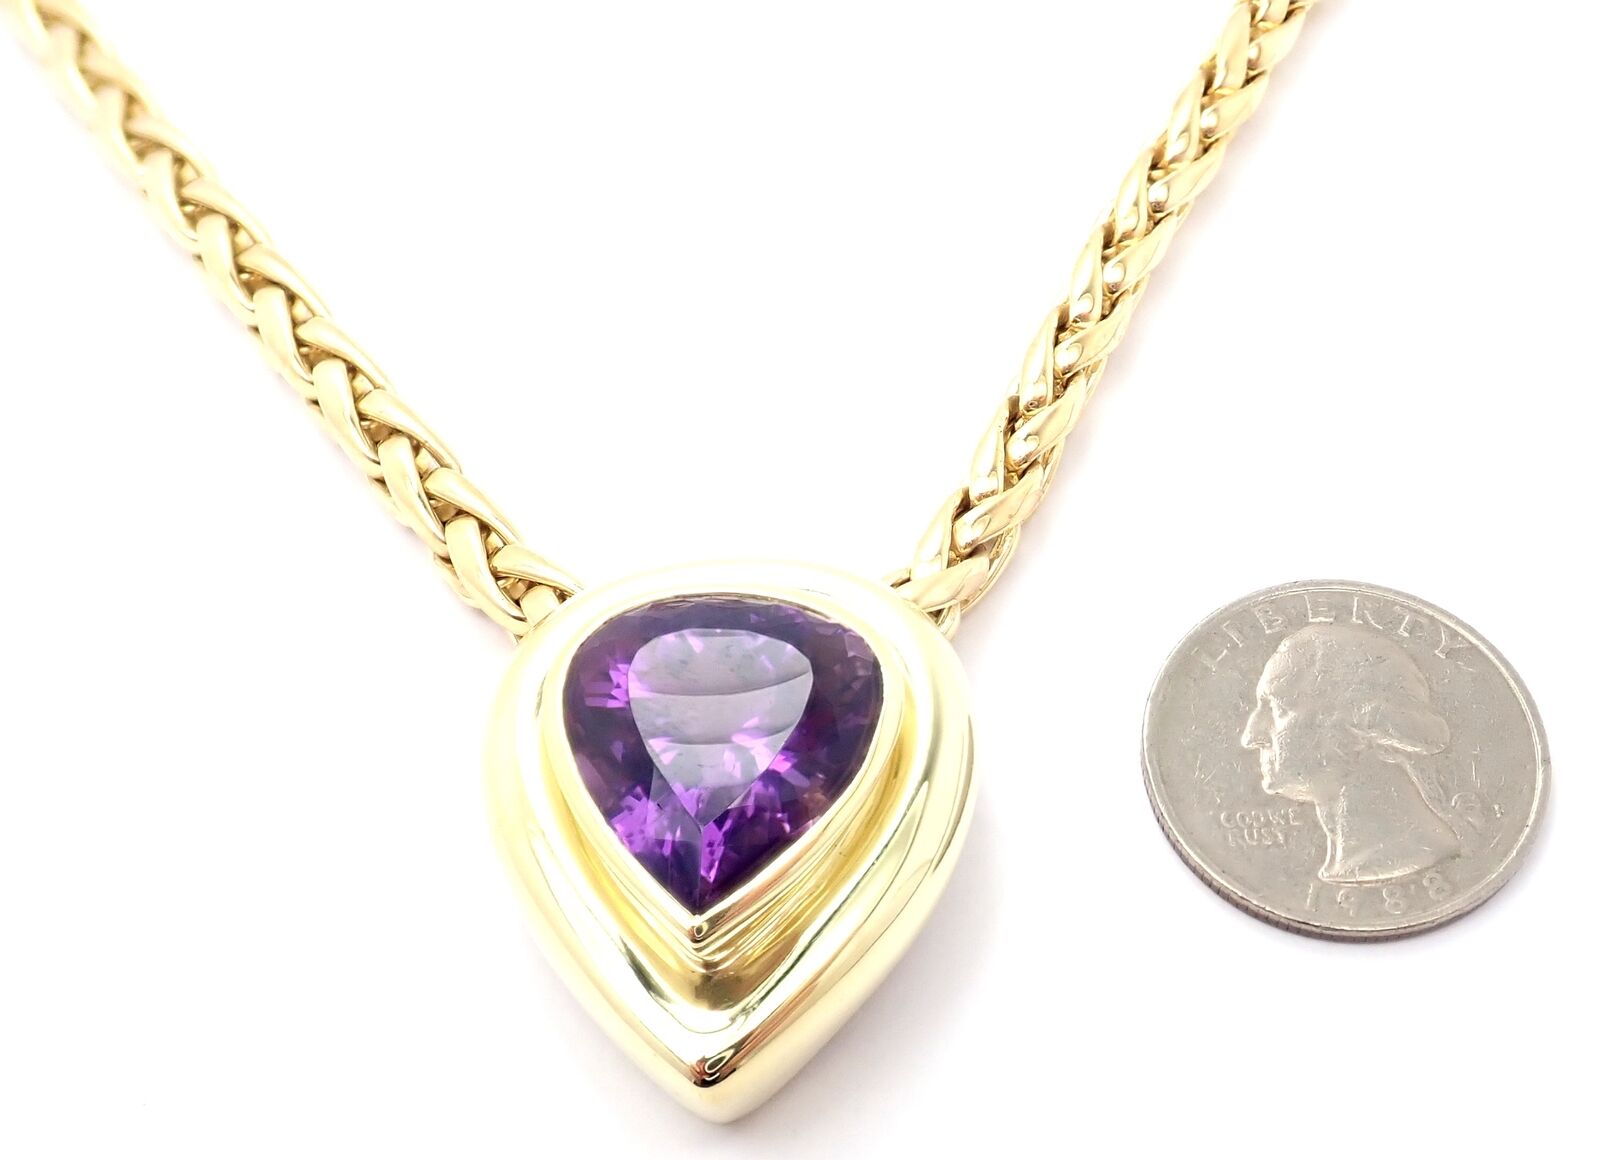 Tiffany & Co. Jewelry & Watches:Fine Jewelry:Necklaces & Pendants Authentic! Tiffany & Co Paloma Picasso 18k Gold Large Amethyst Pendant Necklace